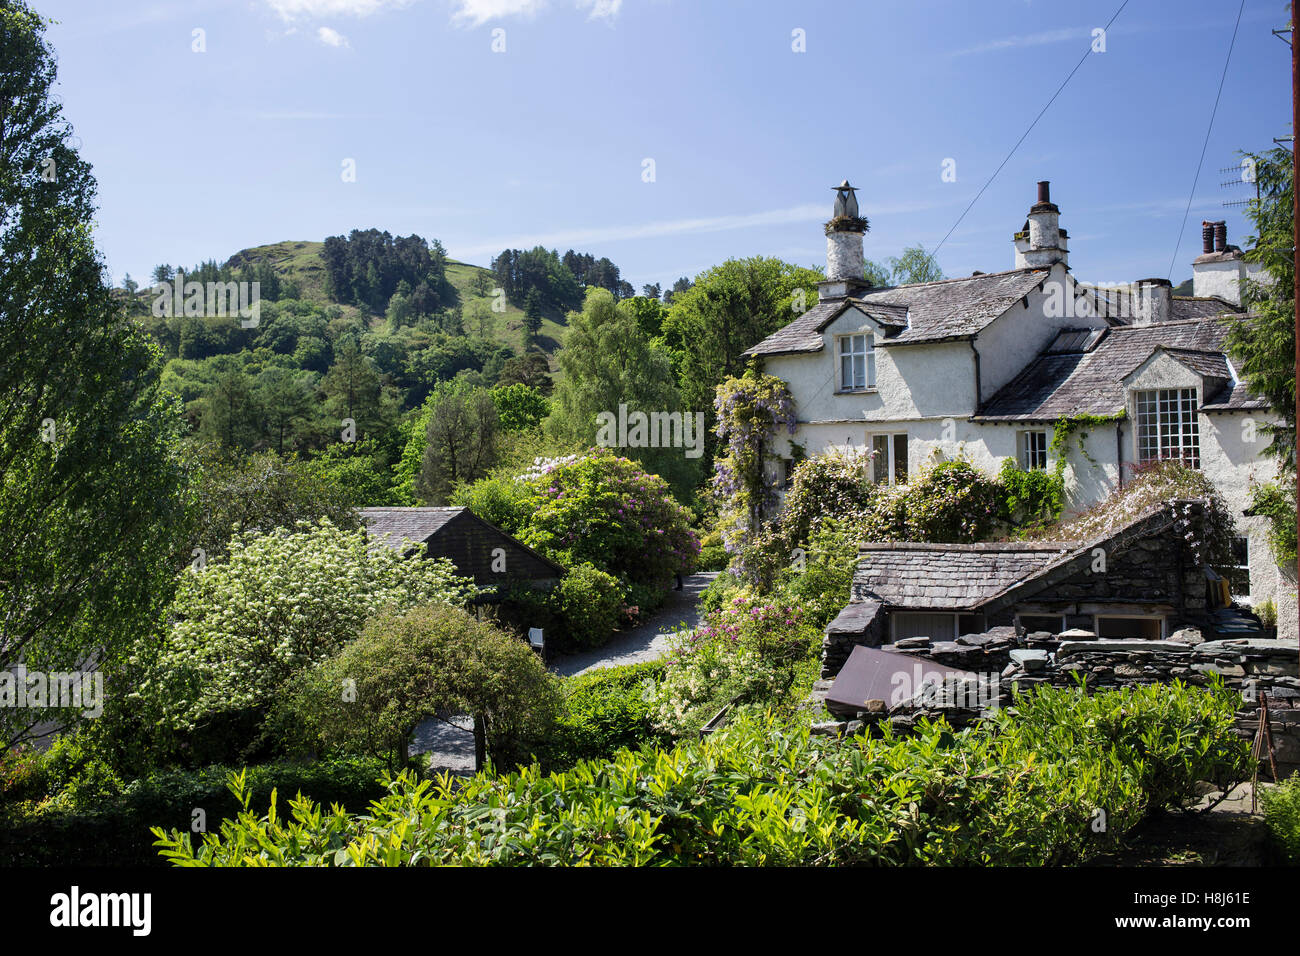 Rydal Hall, once owned by William Wordsworth alongside Rydal Water, in the English Lake District, Cumbria. Stock Photo